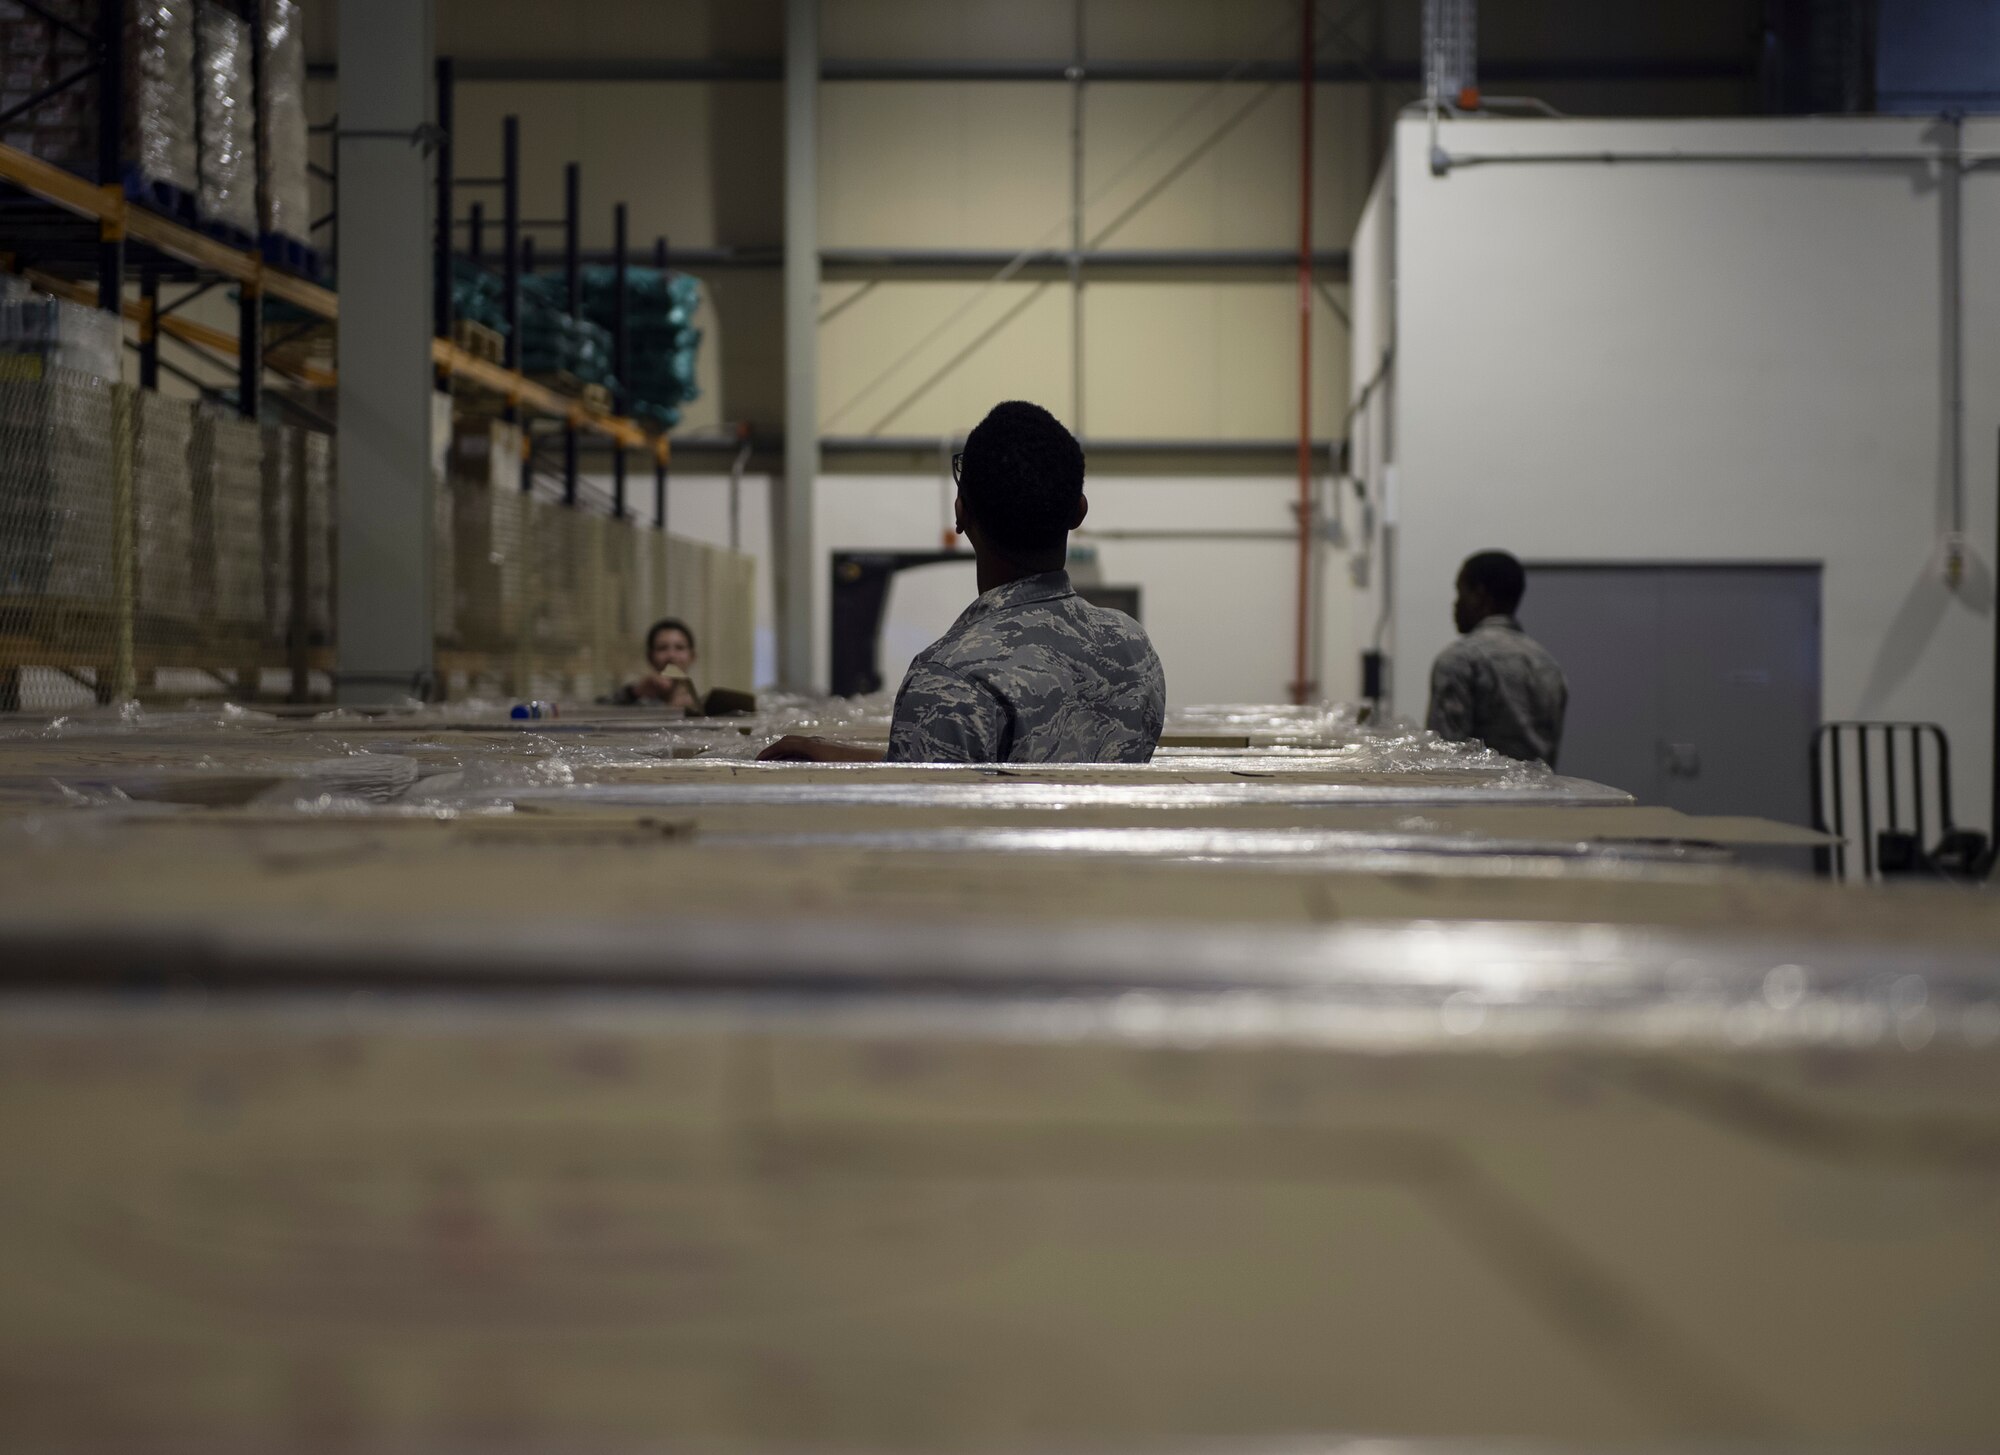 U.S. Air Force Airmen with the 379th Expeditionary Force Support Squadron check the water pallet shipping numbers to ensure the water is safe to drink at Al Udeid Air Base, Qatar, May 10, 2017.  Each week, a small team of Airmen work together to review shipments of produce, making sure the numbers matches the quantity received and that the quality of the produce meets standards. (U.S. Air Force photo by Tech. Sgt. Amy M. Lovgren)